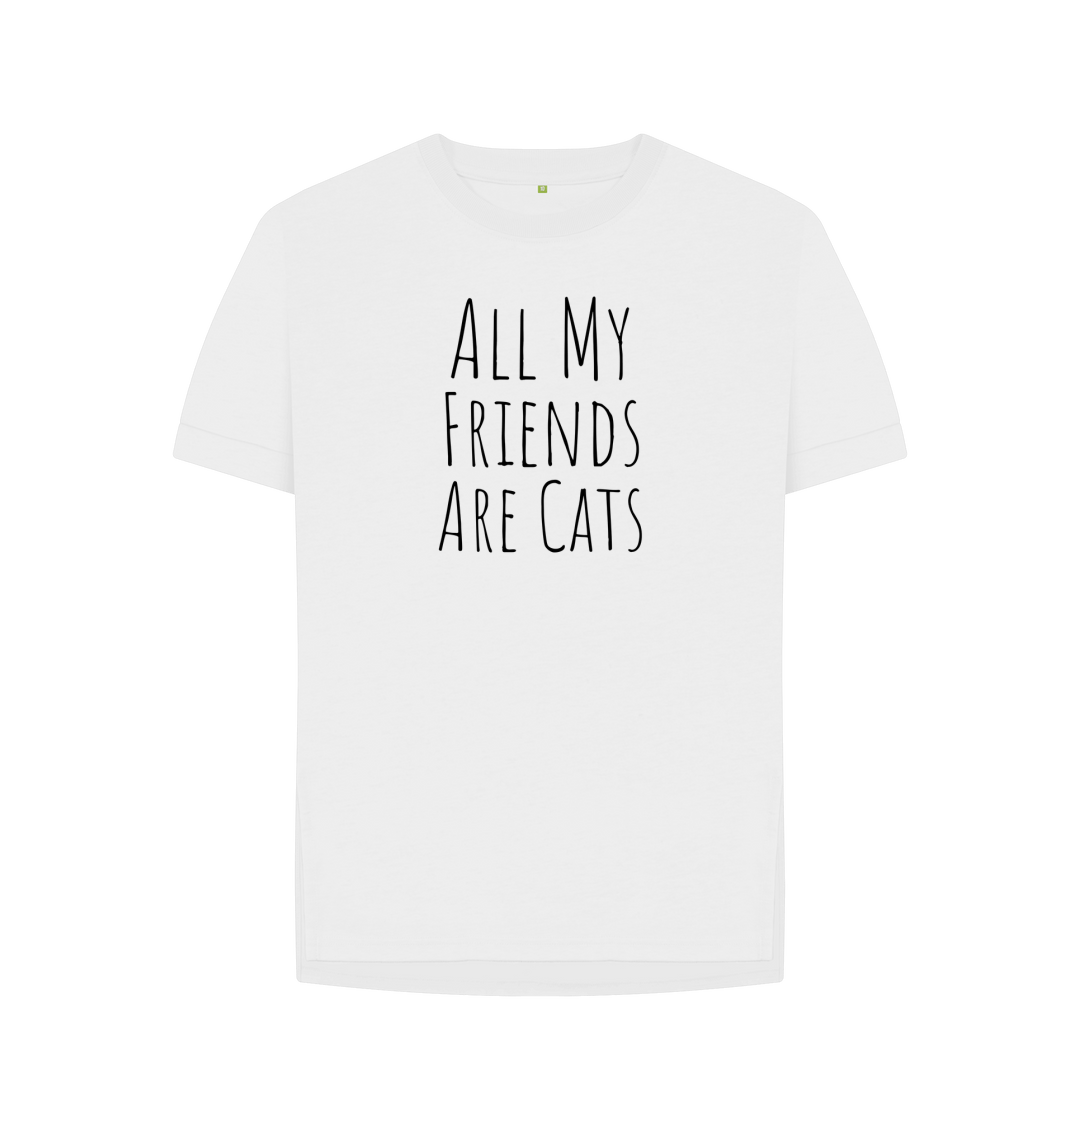 Akademi vant automatisk FunnyT-shirts- All My Friends Are Cats